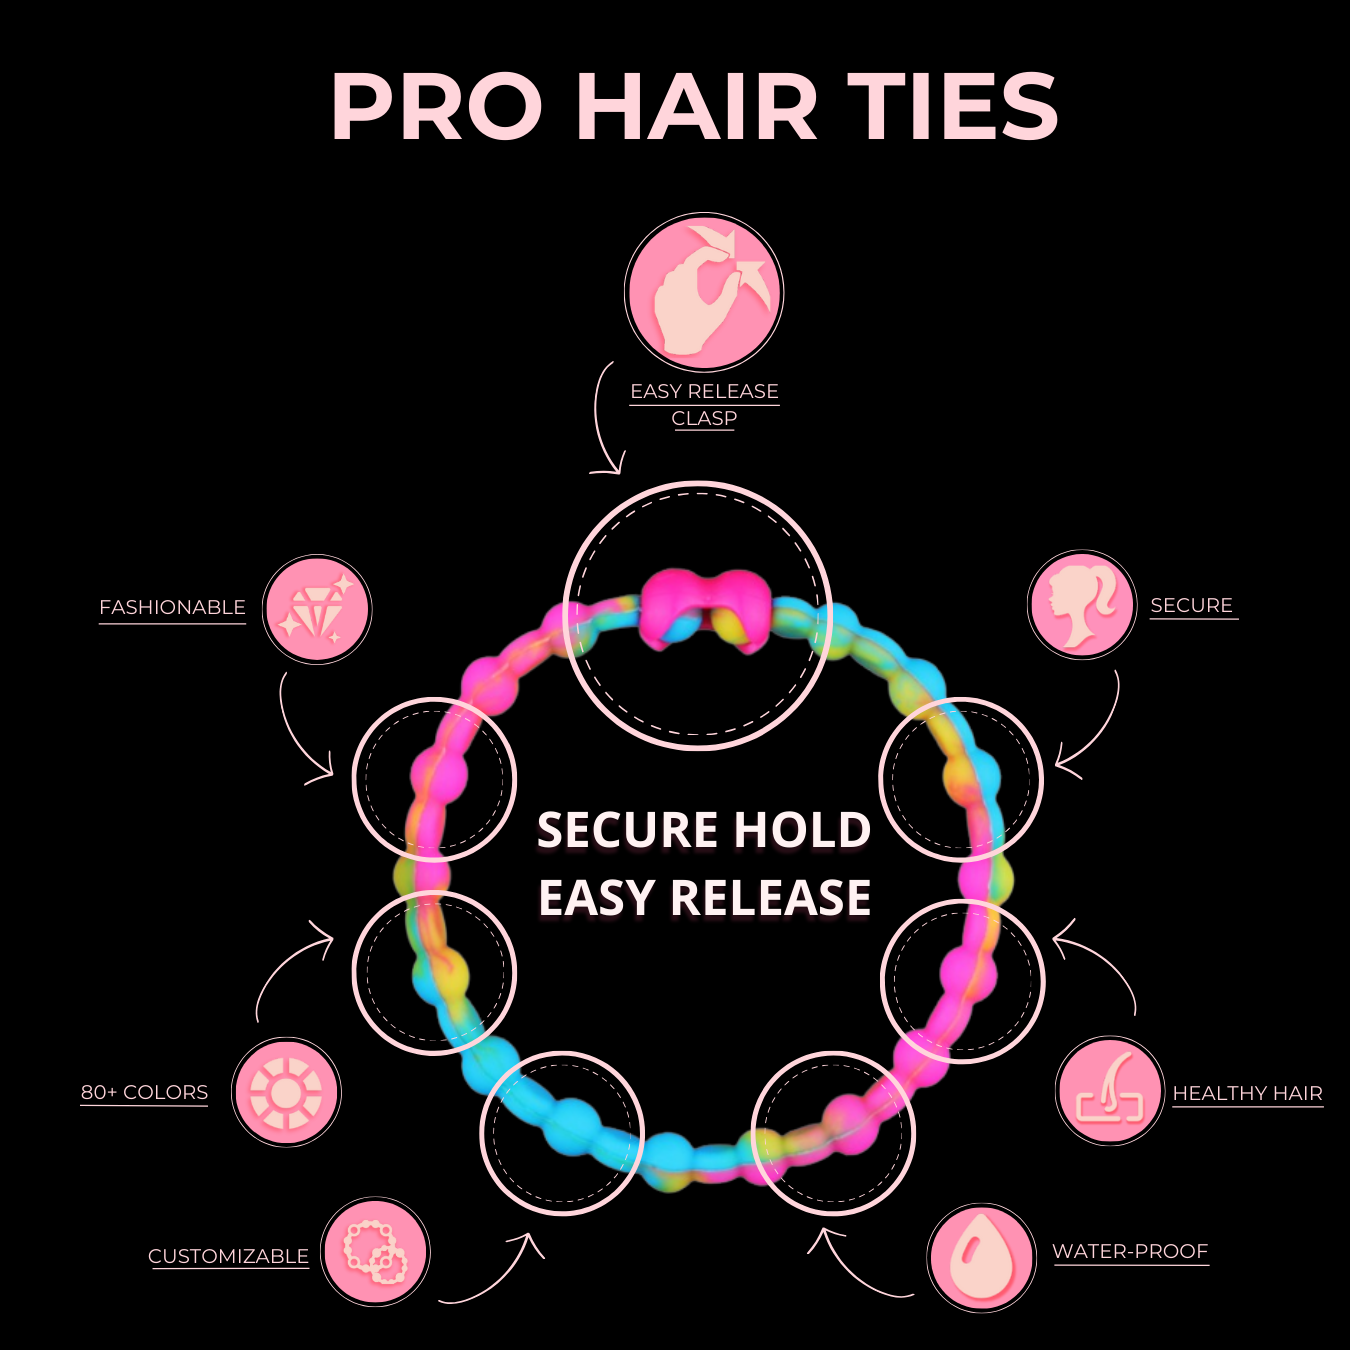 Aurora Dream Pack PRO Hair Ties: Easy Release Adjustable for Every Hair Type PACK OF 4